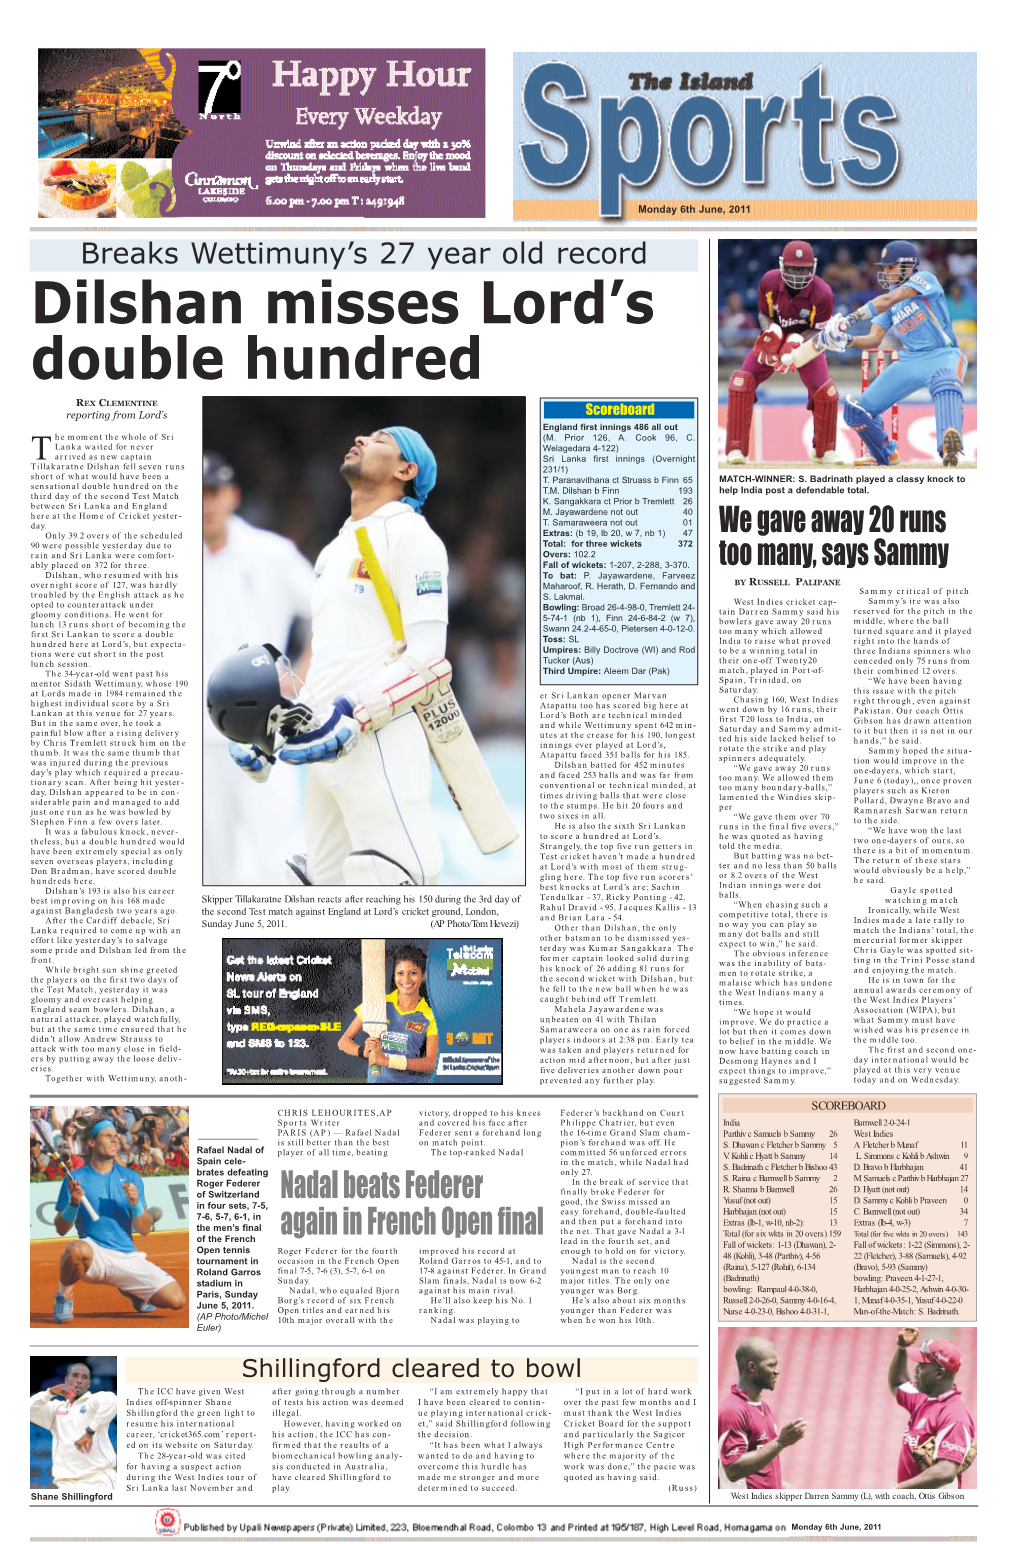 Dilshan Misses Lord's Double Hundred